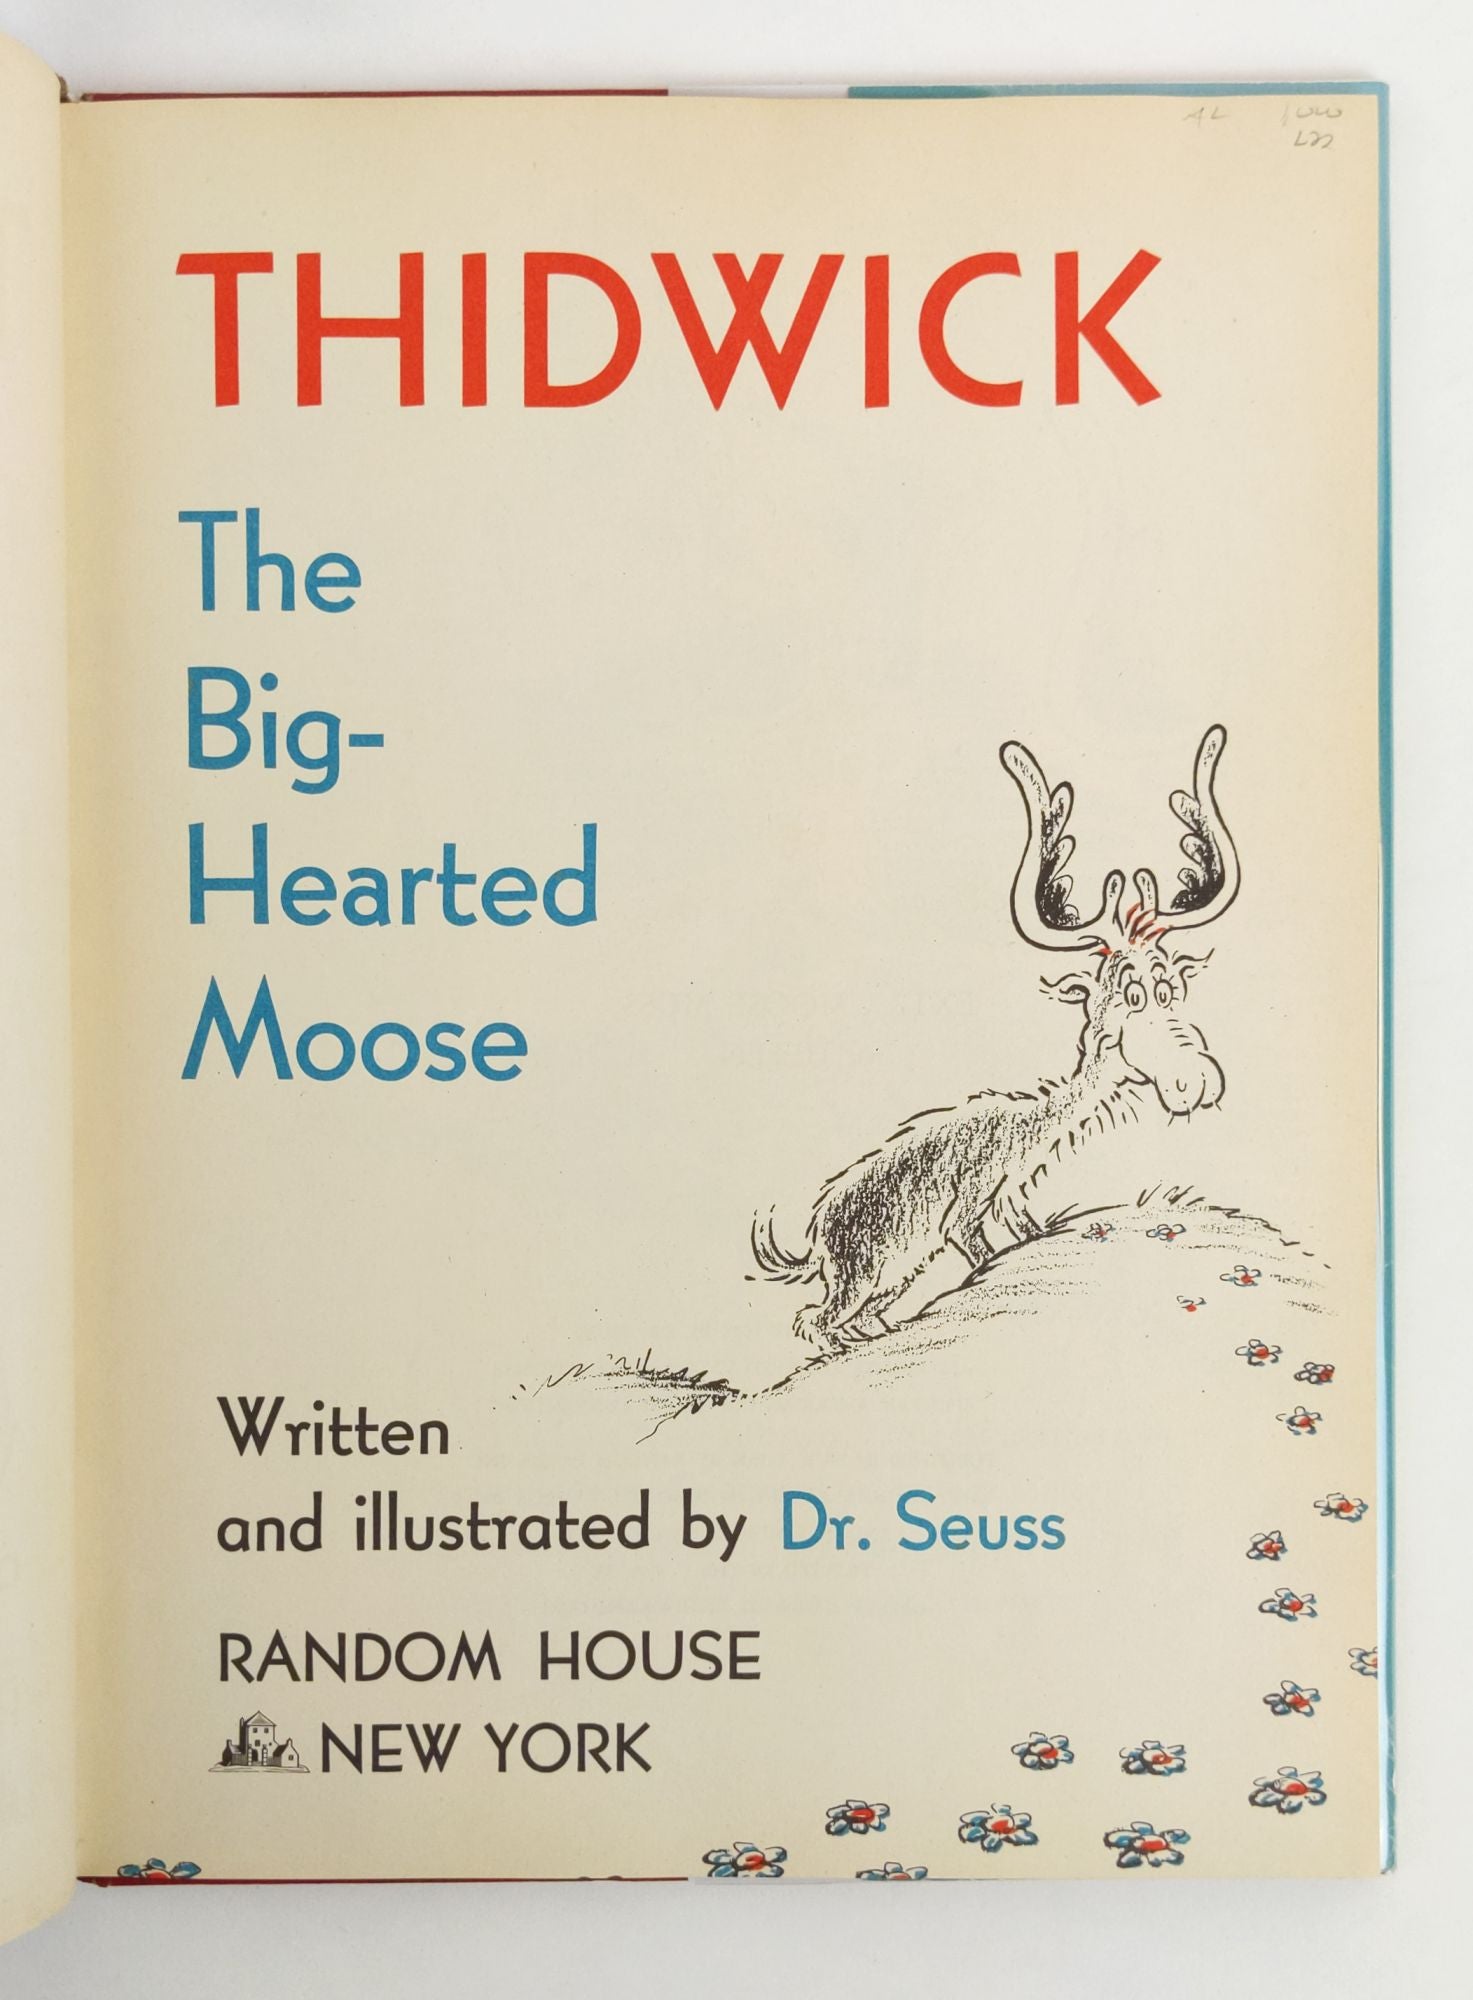 Product Image for THIDWICK THE BIG-HEARTED MOOSE